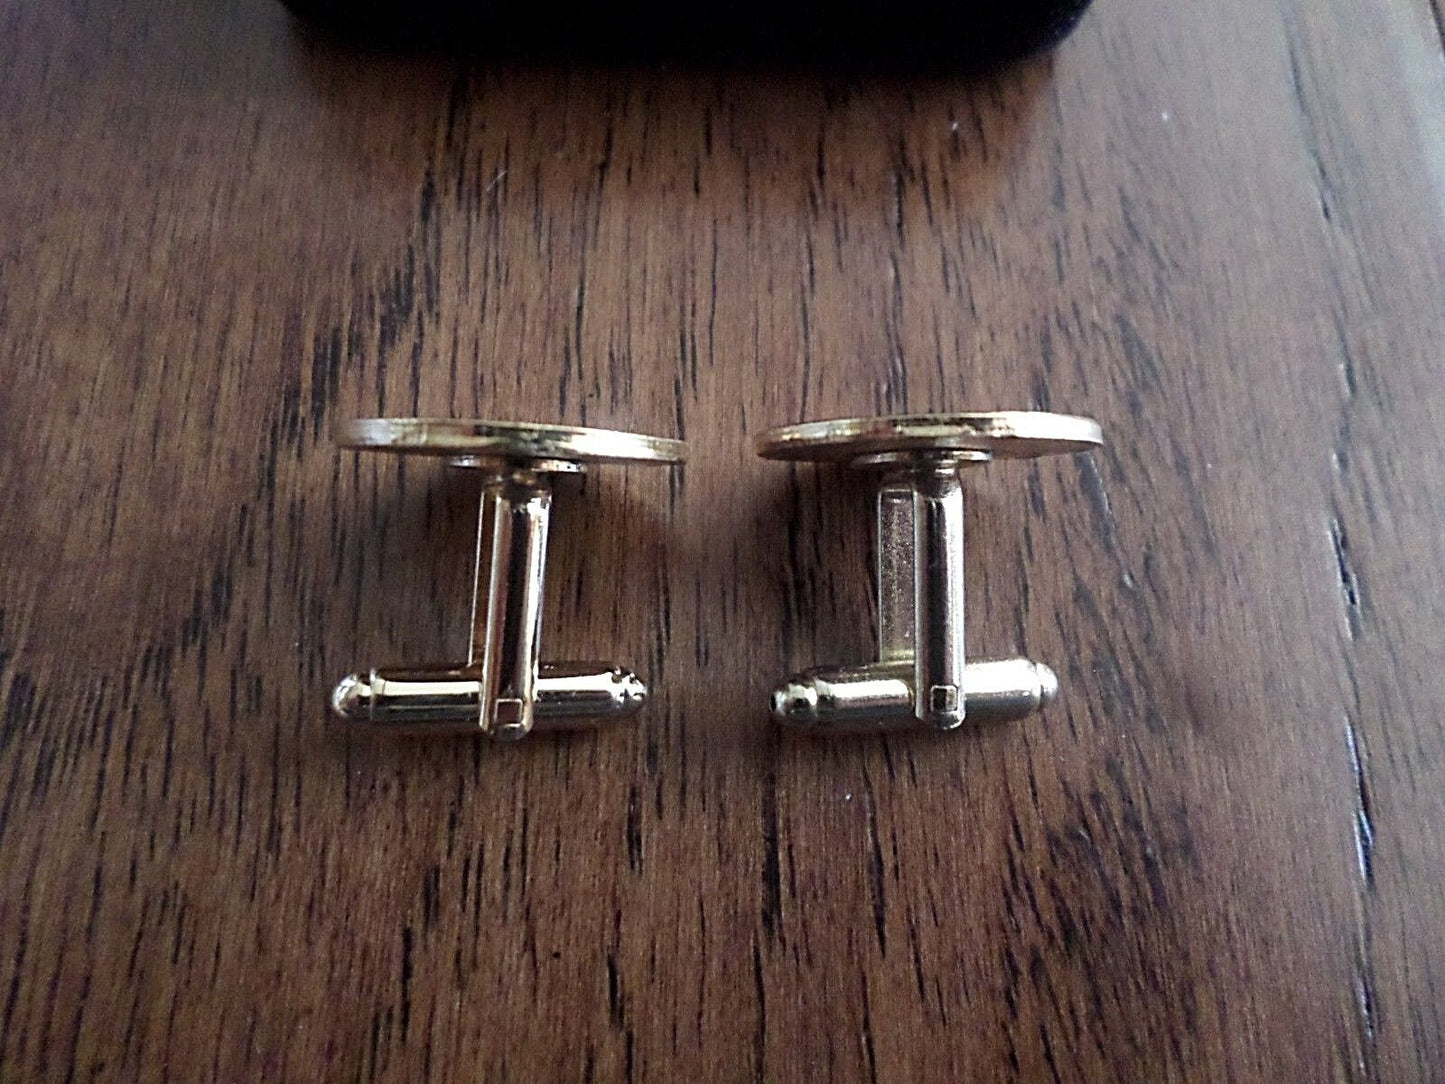 U.S MILITARY AIR FORCE CUFFLINKS WITH JEWELRY BOX 1 SET CUFF LINKS BOXED